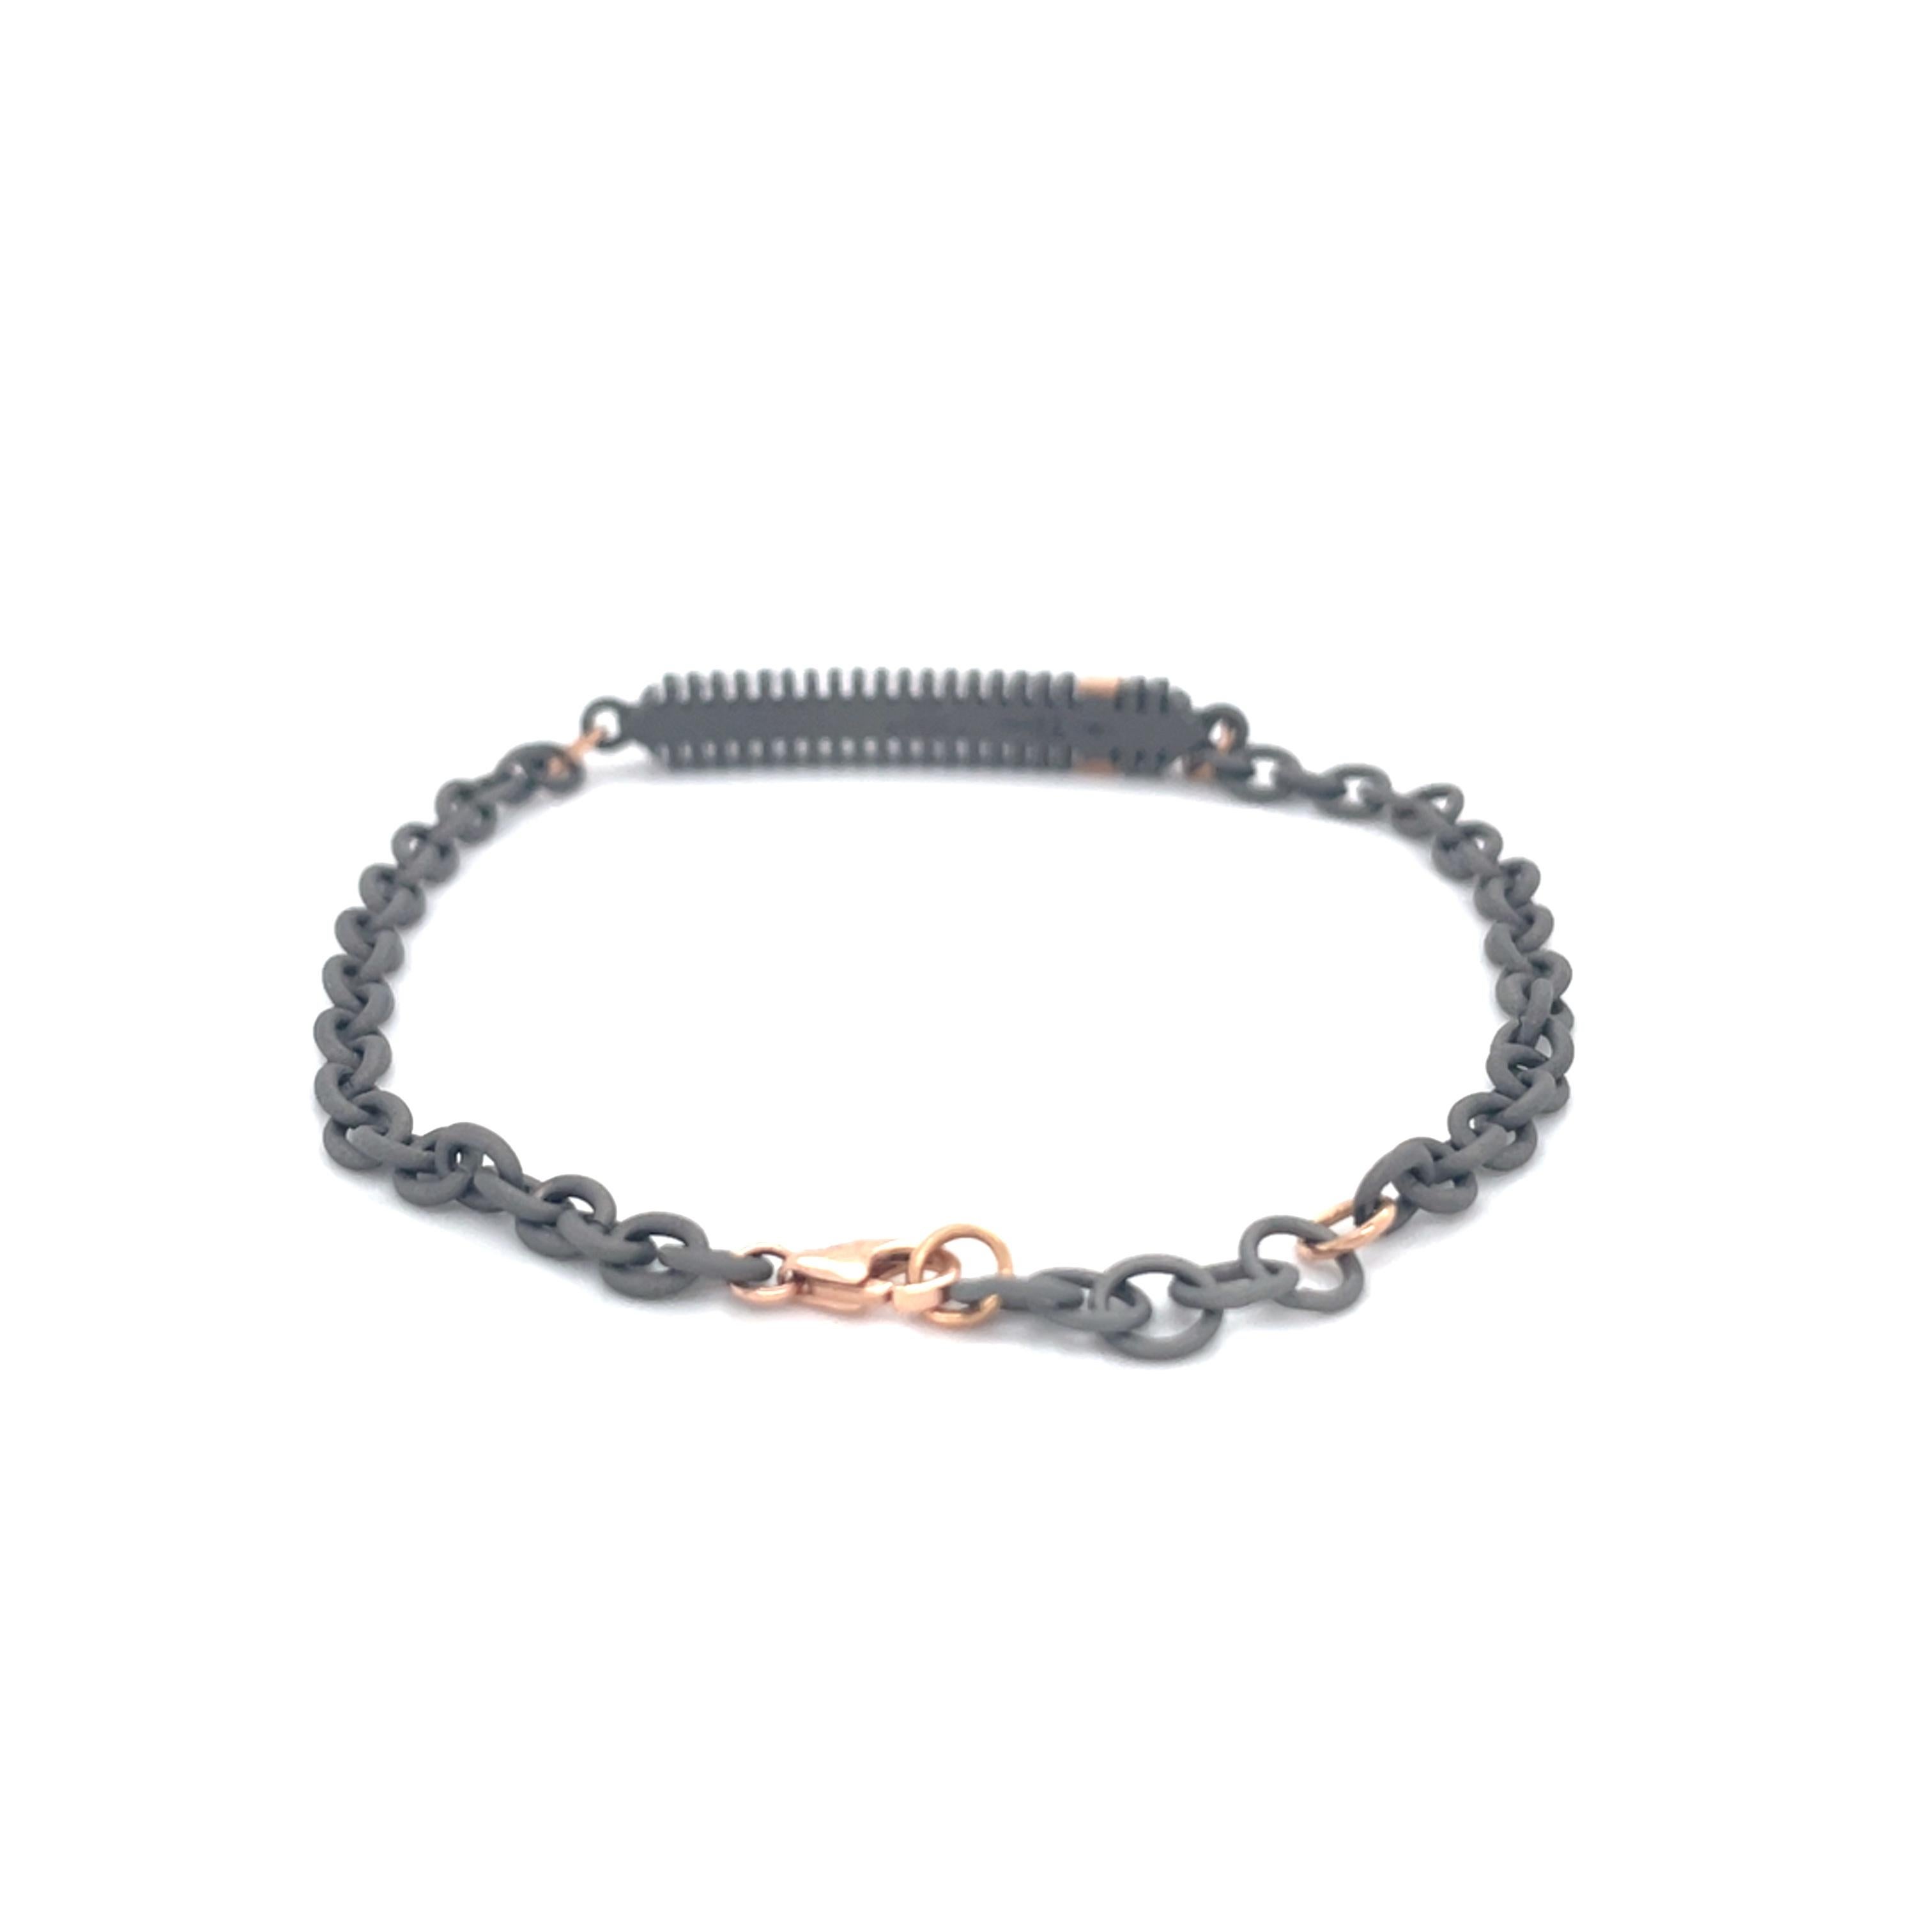 This titanium rose gold bracelet is from our Men's Collection. This modern chain bracelet is decorated with 3 natural colorless round diamonds in total of 0.03 Carat placed on 18K yellow gold detail. The bracelet is 20cm long. Perfect for daily